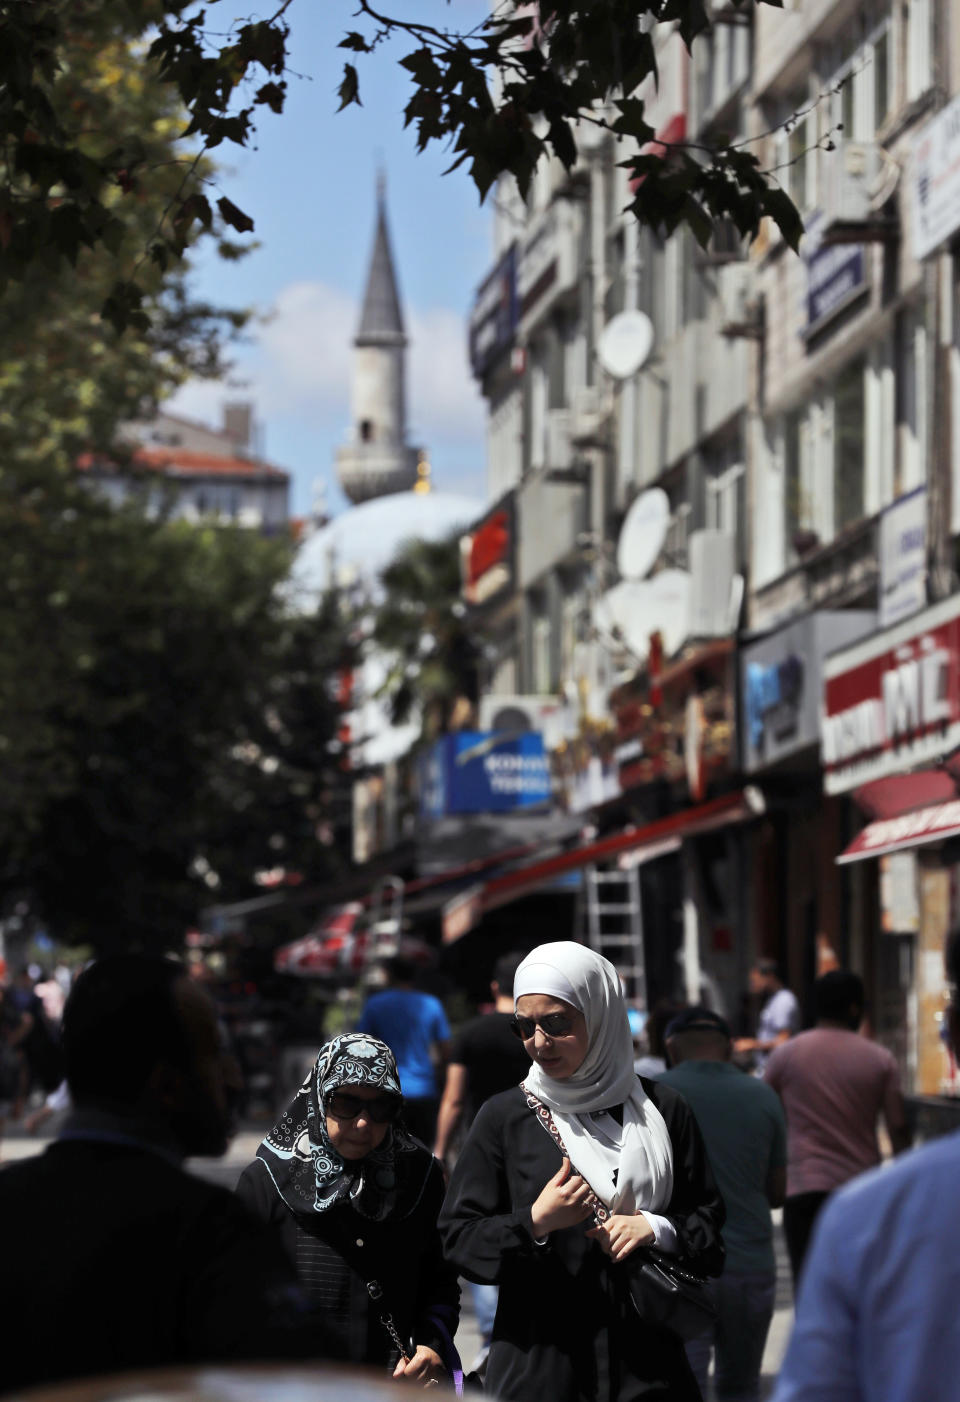 In this photo taken on Tuesday, Aug. 20, 2019, people walk in the Istanbul neighborhood of Aksaray, where many Syrians live. Syrians say Turkey has been detaining and forcing some Syrian refugees to return back to their country the past month. The expulsions reflect increasing anti-refugee sentiment in Turkey, which opened its doors to millions of Syrians fleeing their country's civil war. (AP Photo/Lefteris Pitarakis)